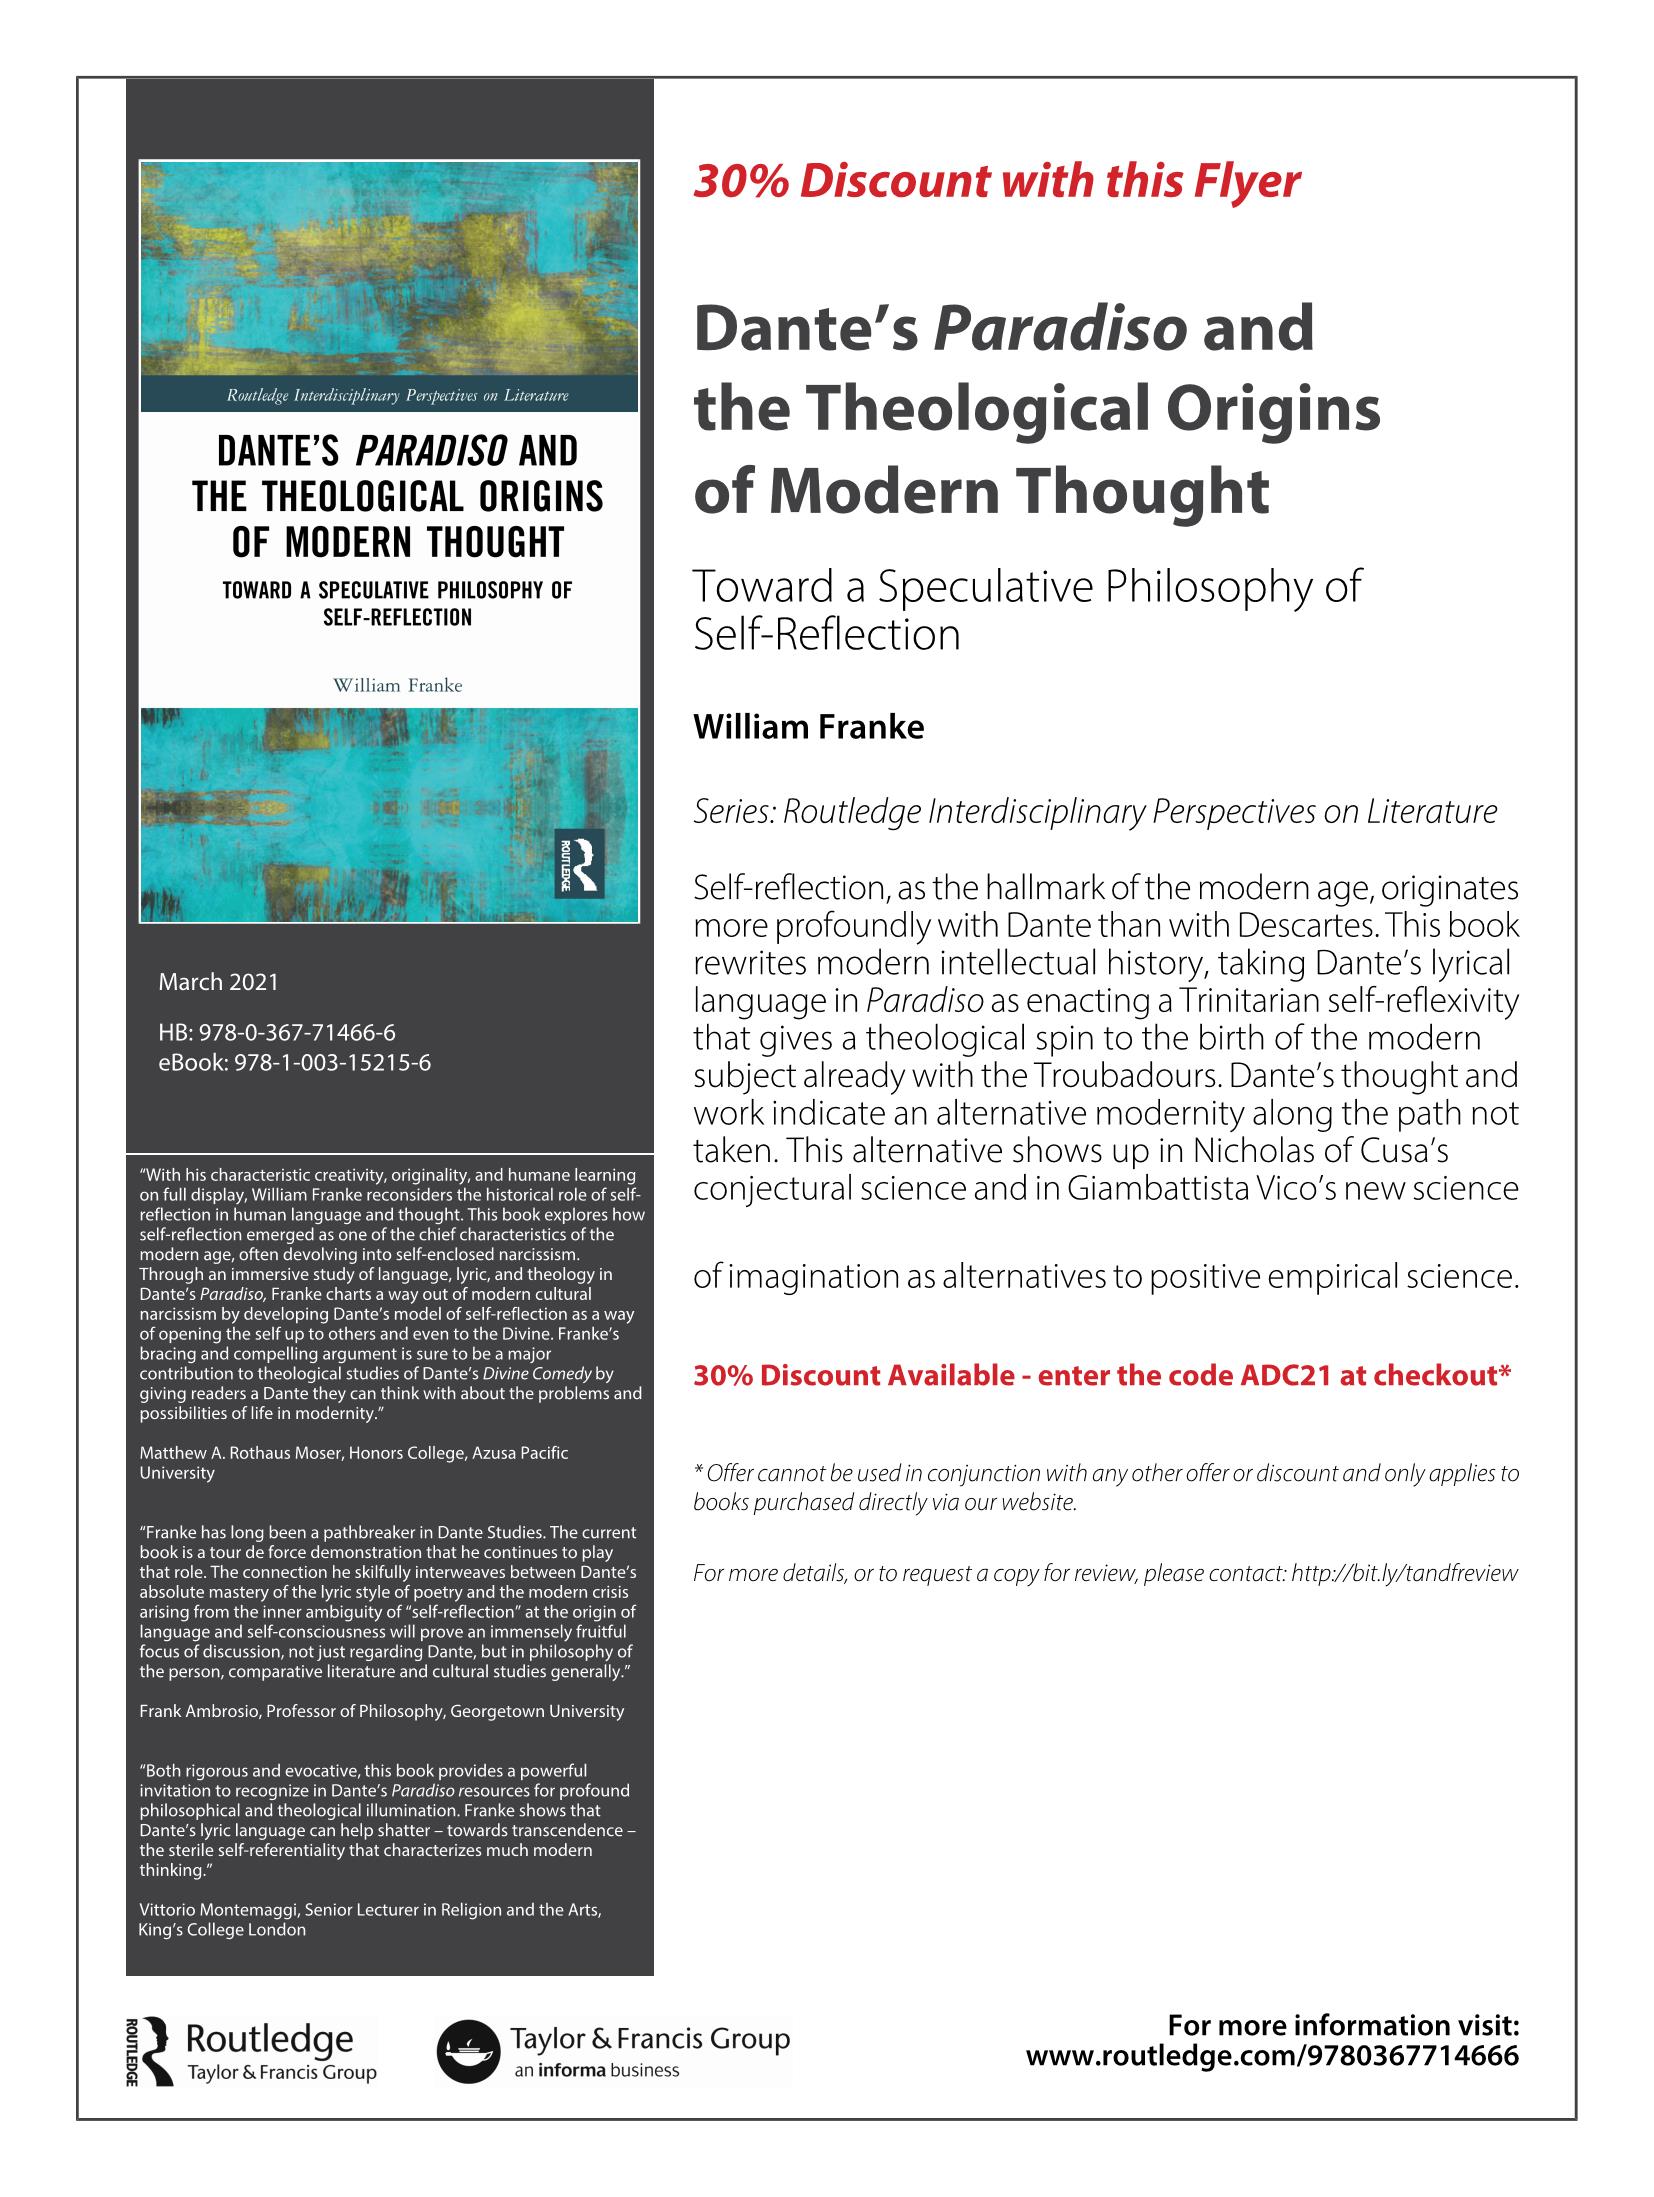 Dante's Paradiso and the Theological Origins.. Flyer (002)_Page_1